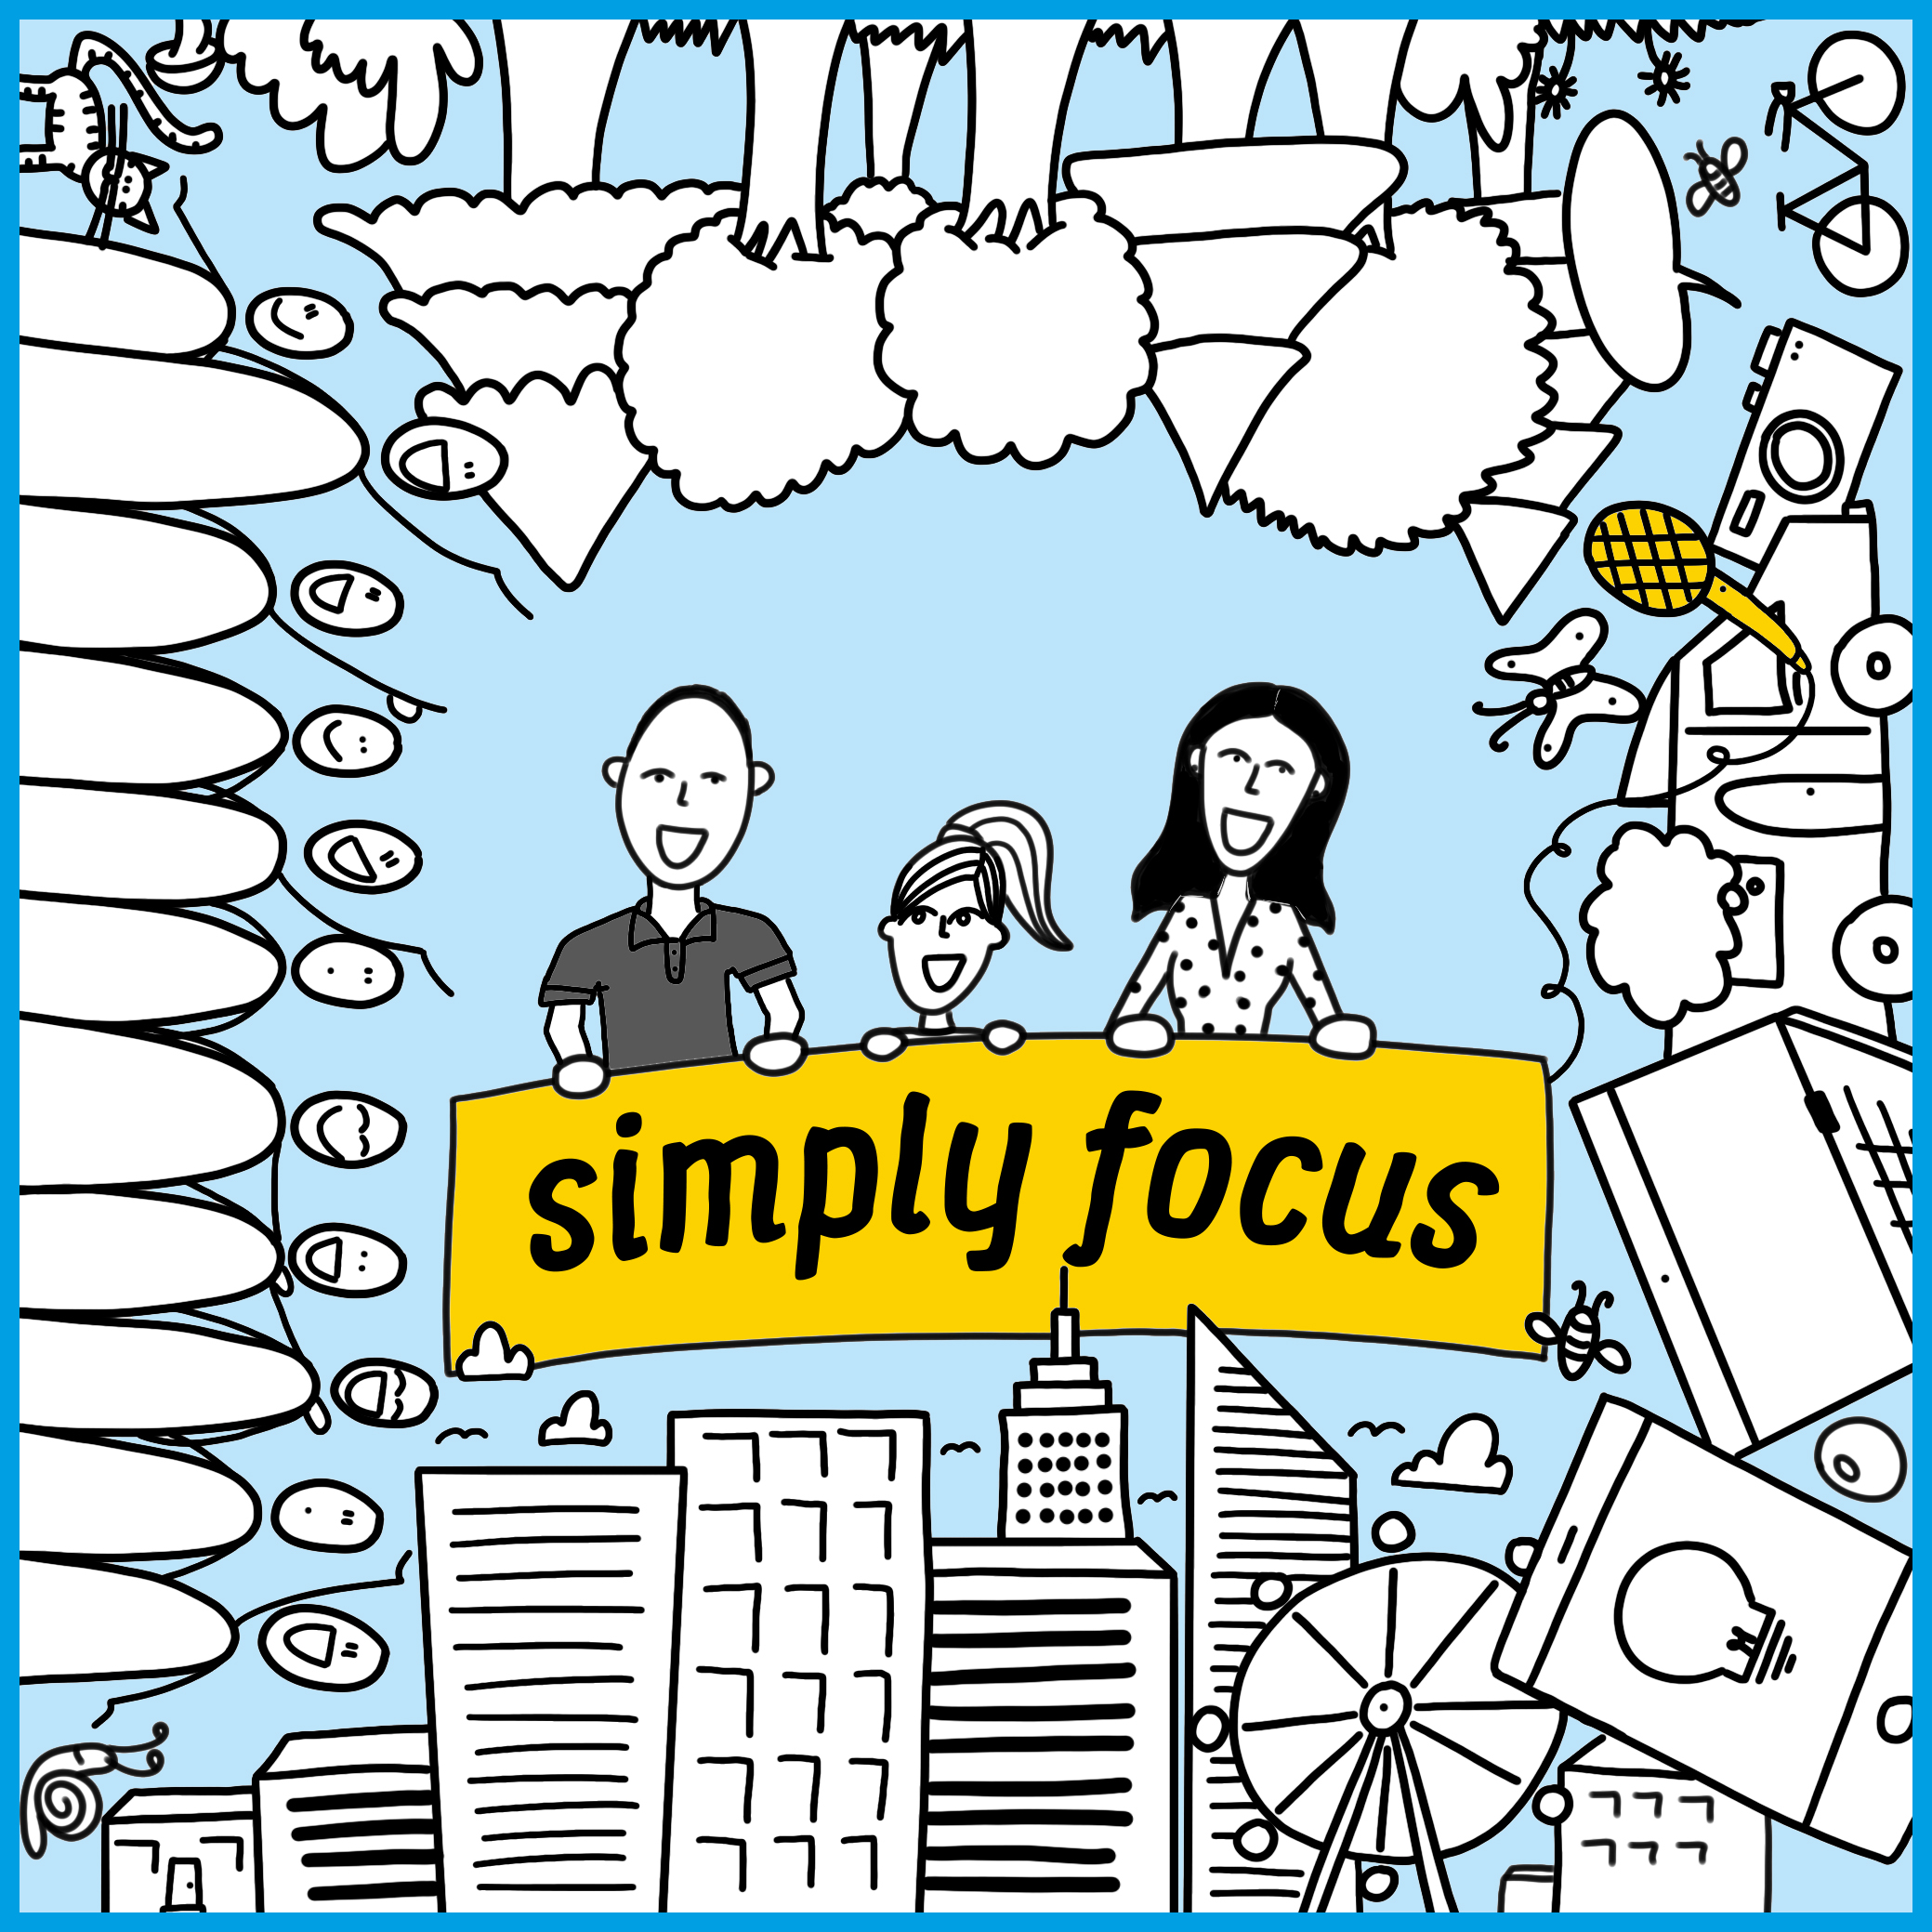 SIMPLY FOCUS Podcast: The Good Life Approach - Your weekly podcast with the little extra Solution Focus for your daily life!